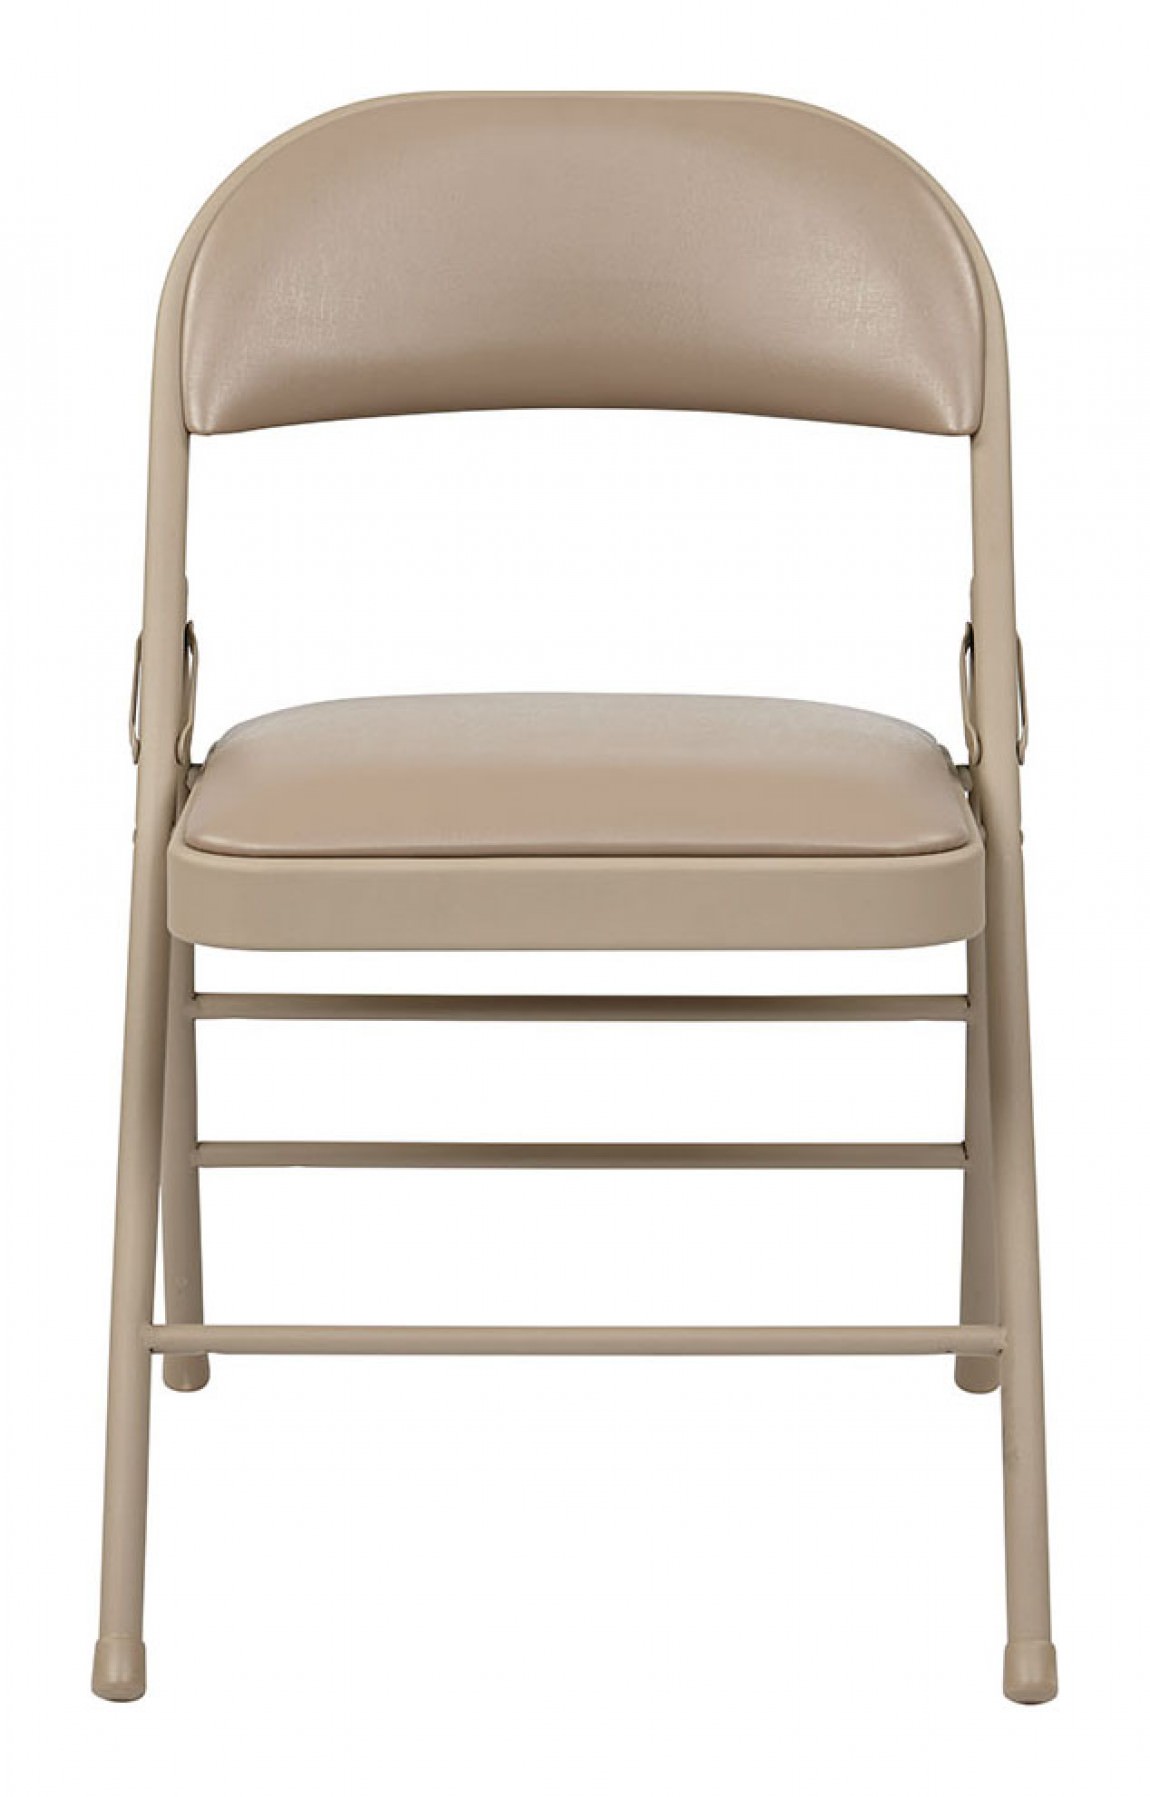 Padded Folding Chair - 4 Pack